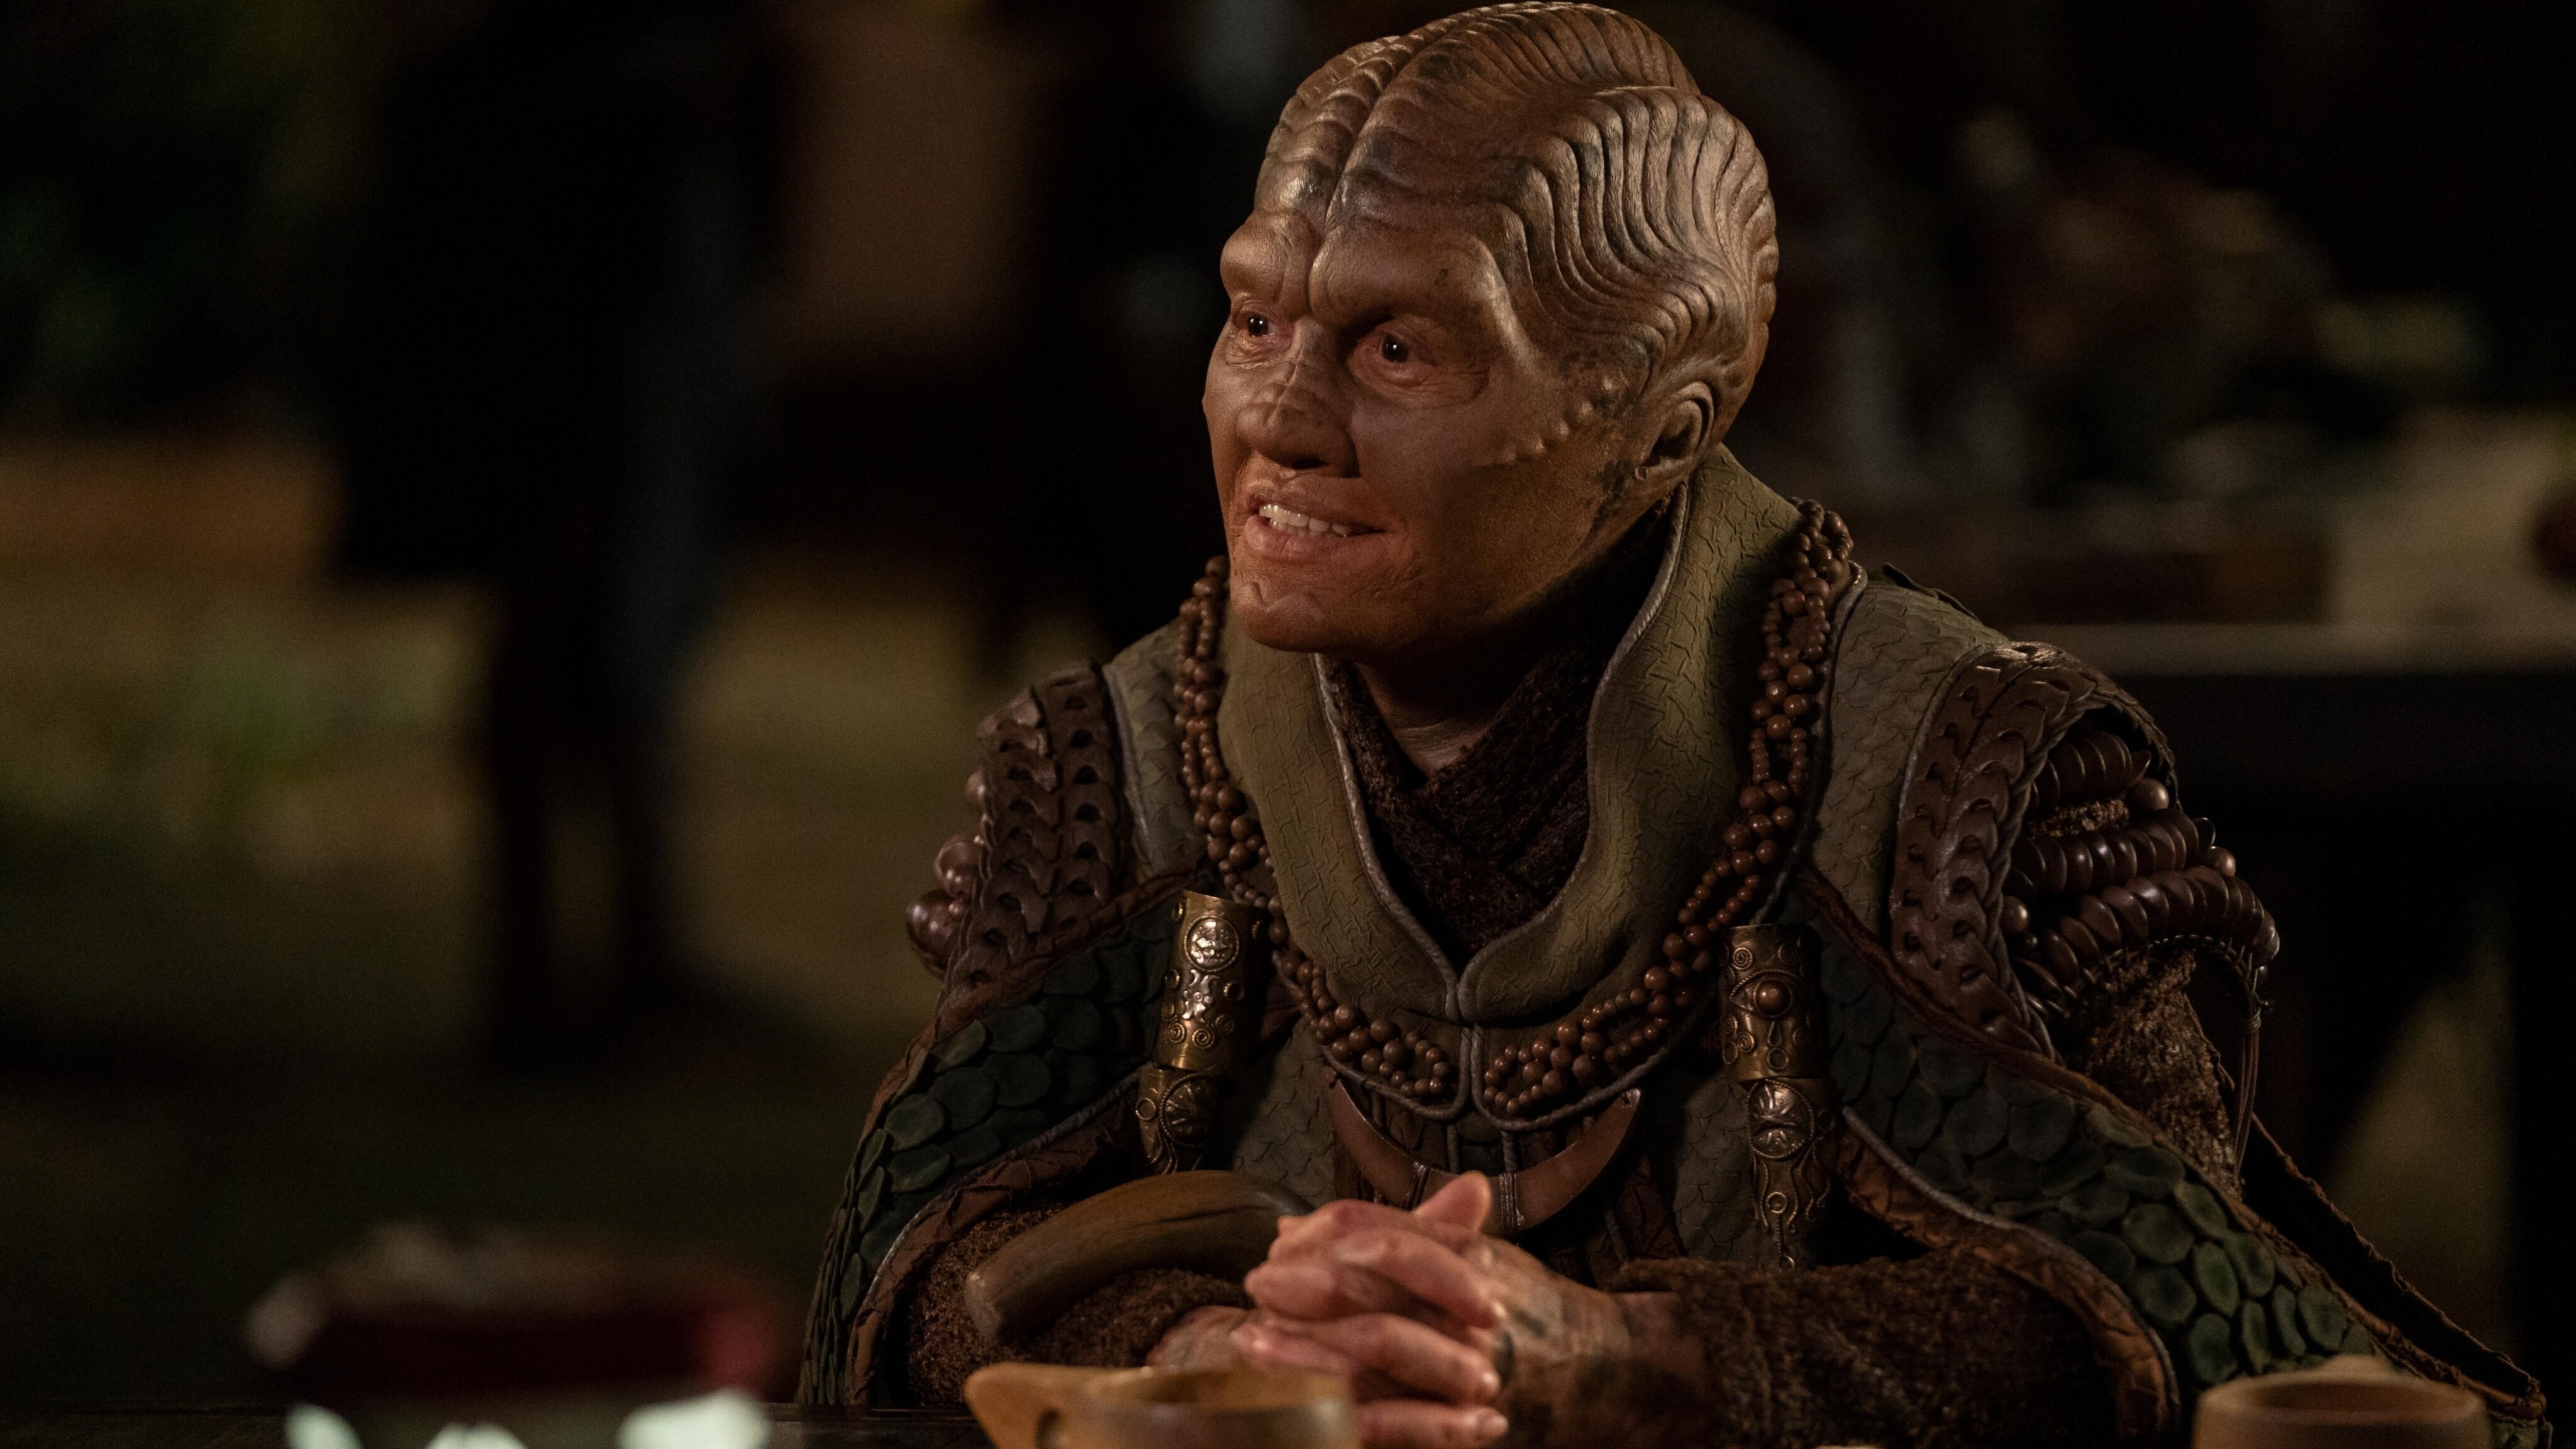 The Orville: New Horizons -- “Midnight Blue” - Episode 308 -- Kelly and Bortus are assigned to a mission that takes them to Heveena’s sanctuary world. Heveena (Rena Owen), shown. (Photo by: Greg Gayne/Hulu)